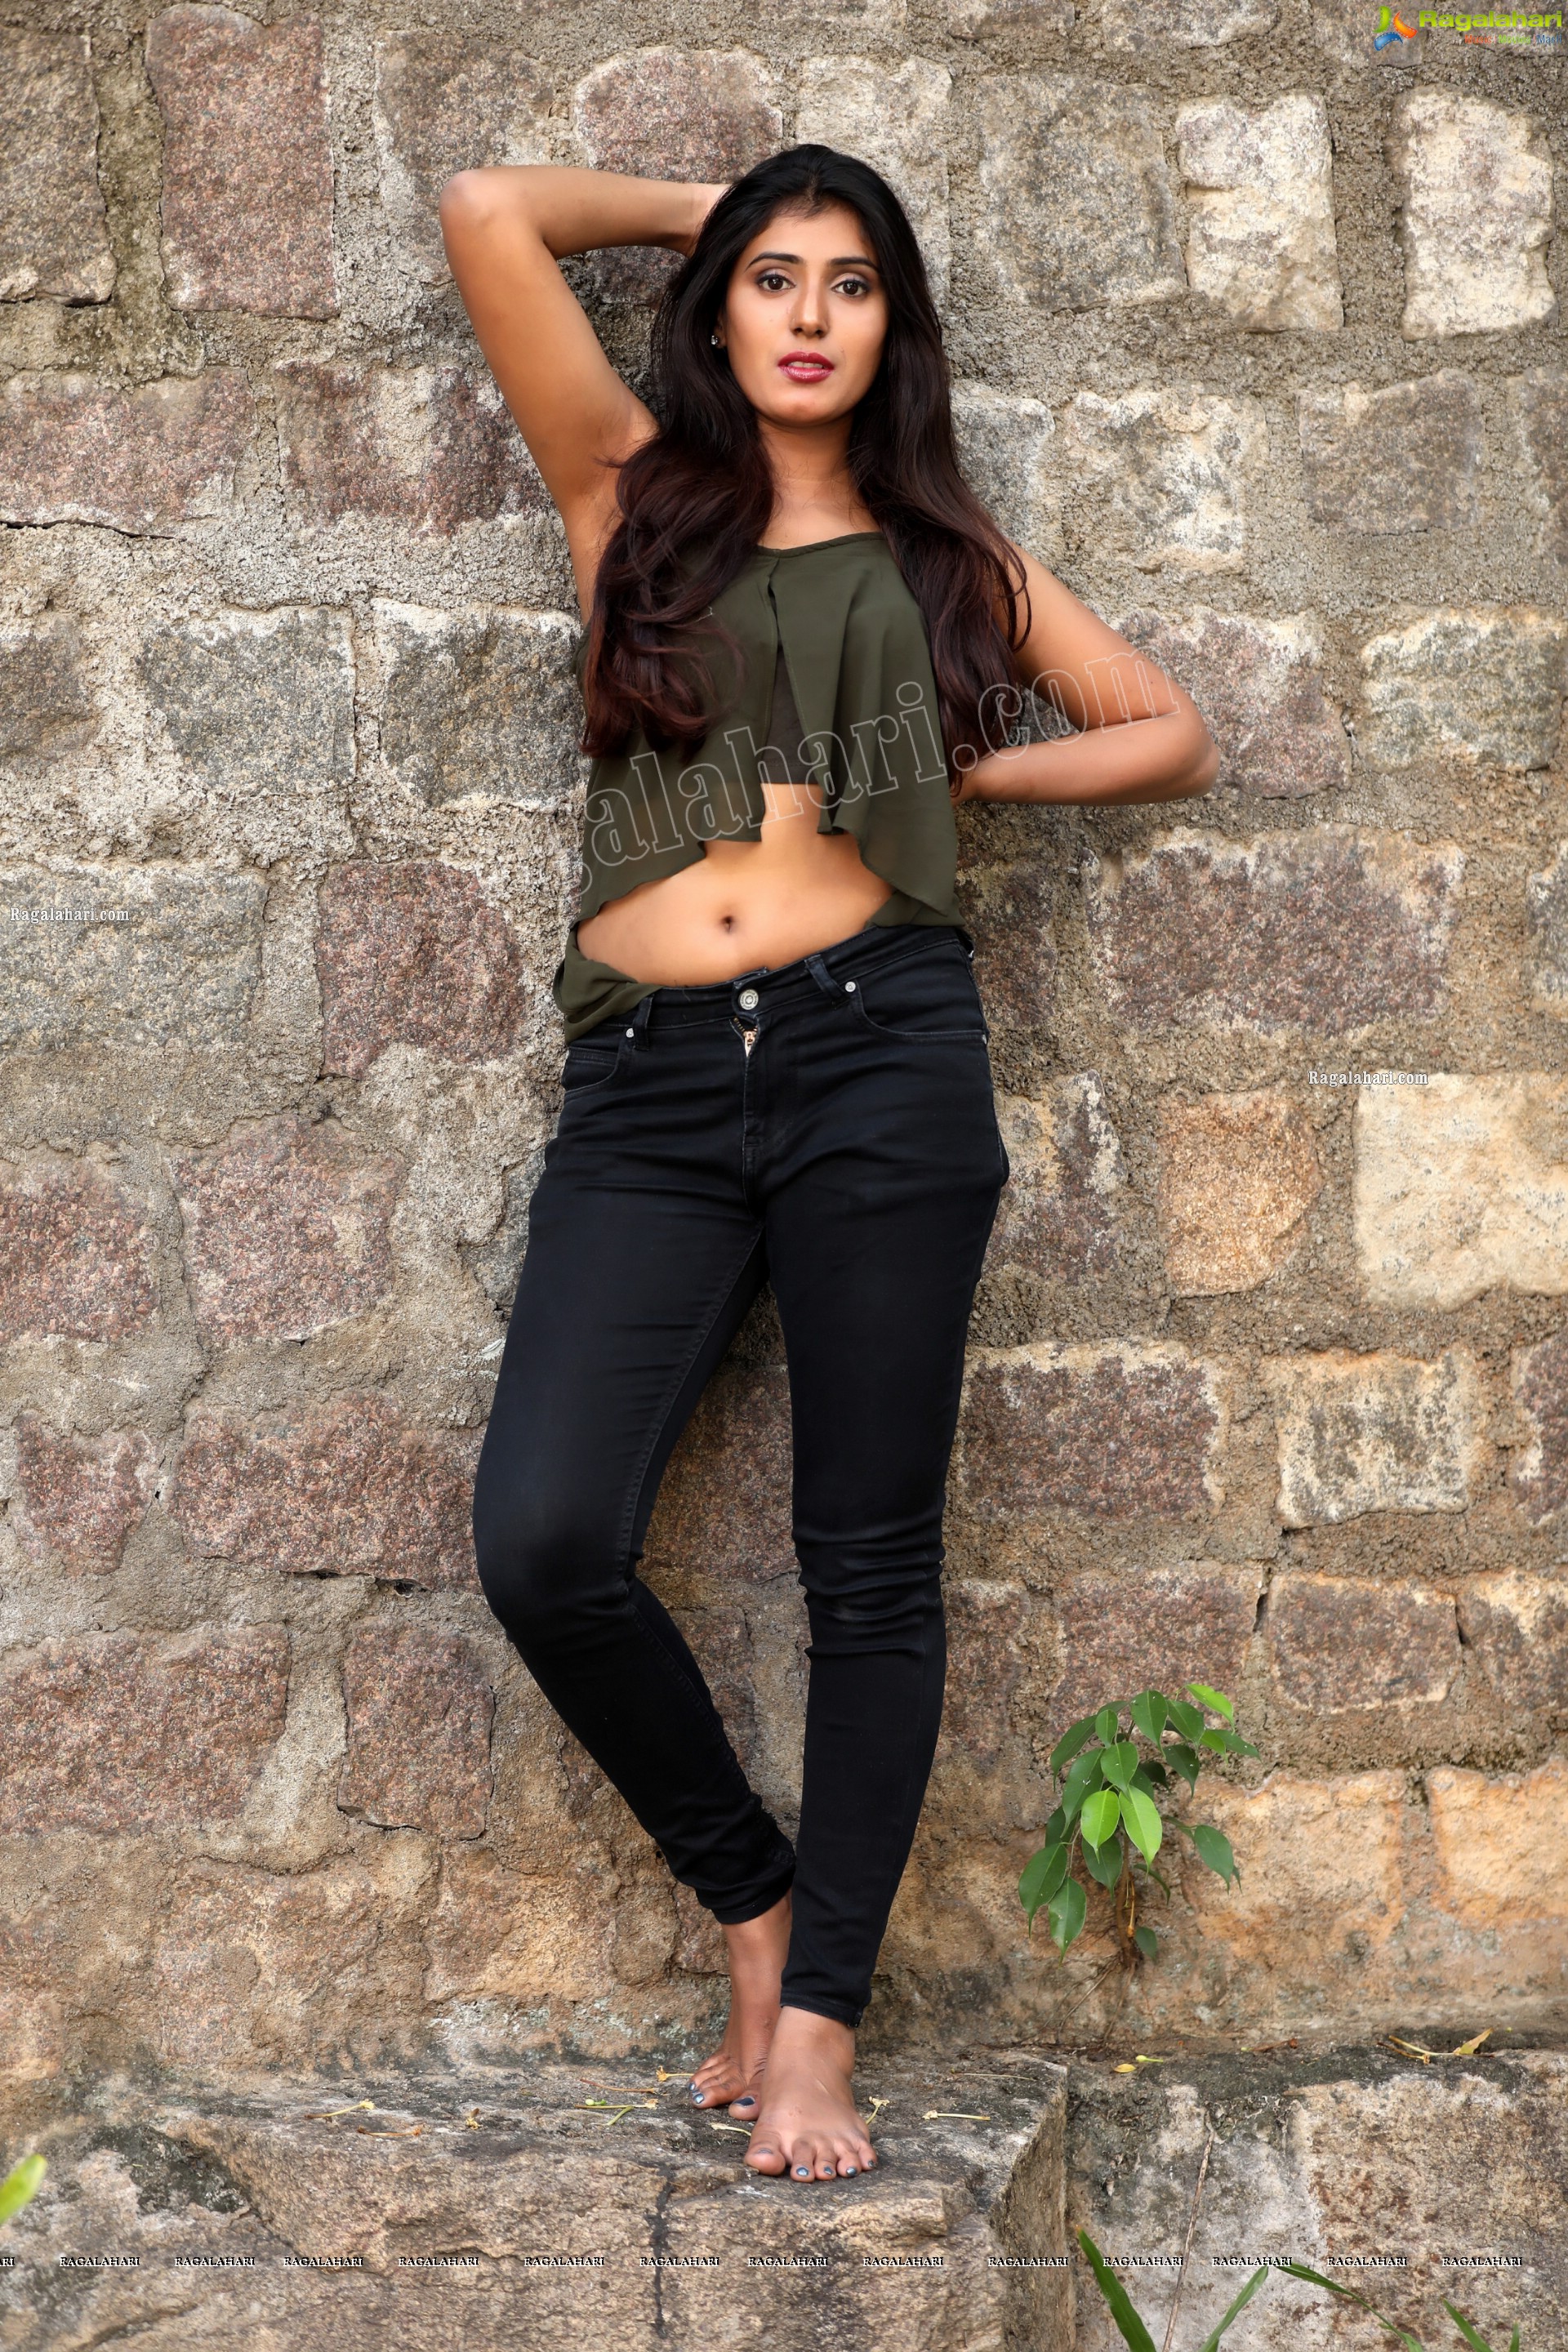 Aishwarya T in Military Green Crop Top and Jeans Exclusive Photo Shoot